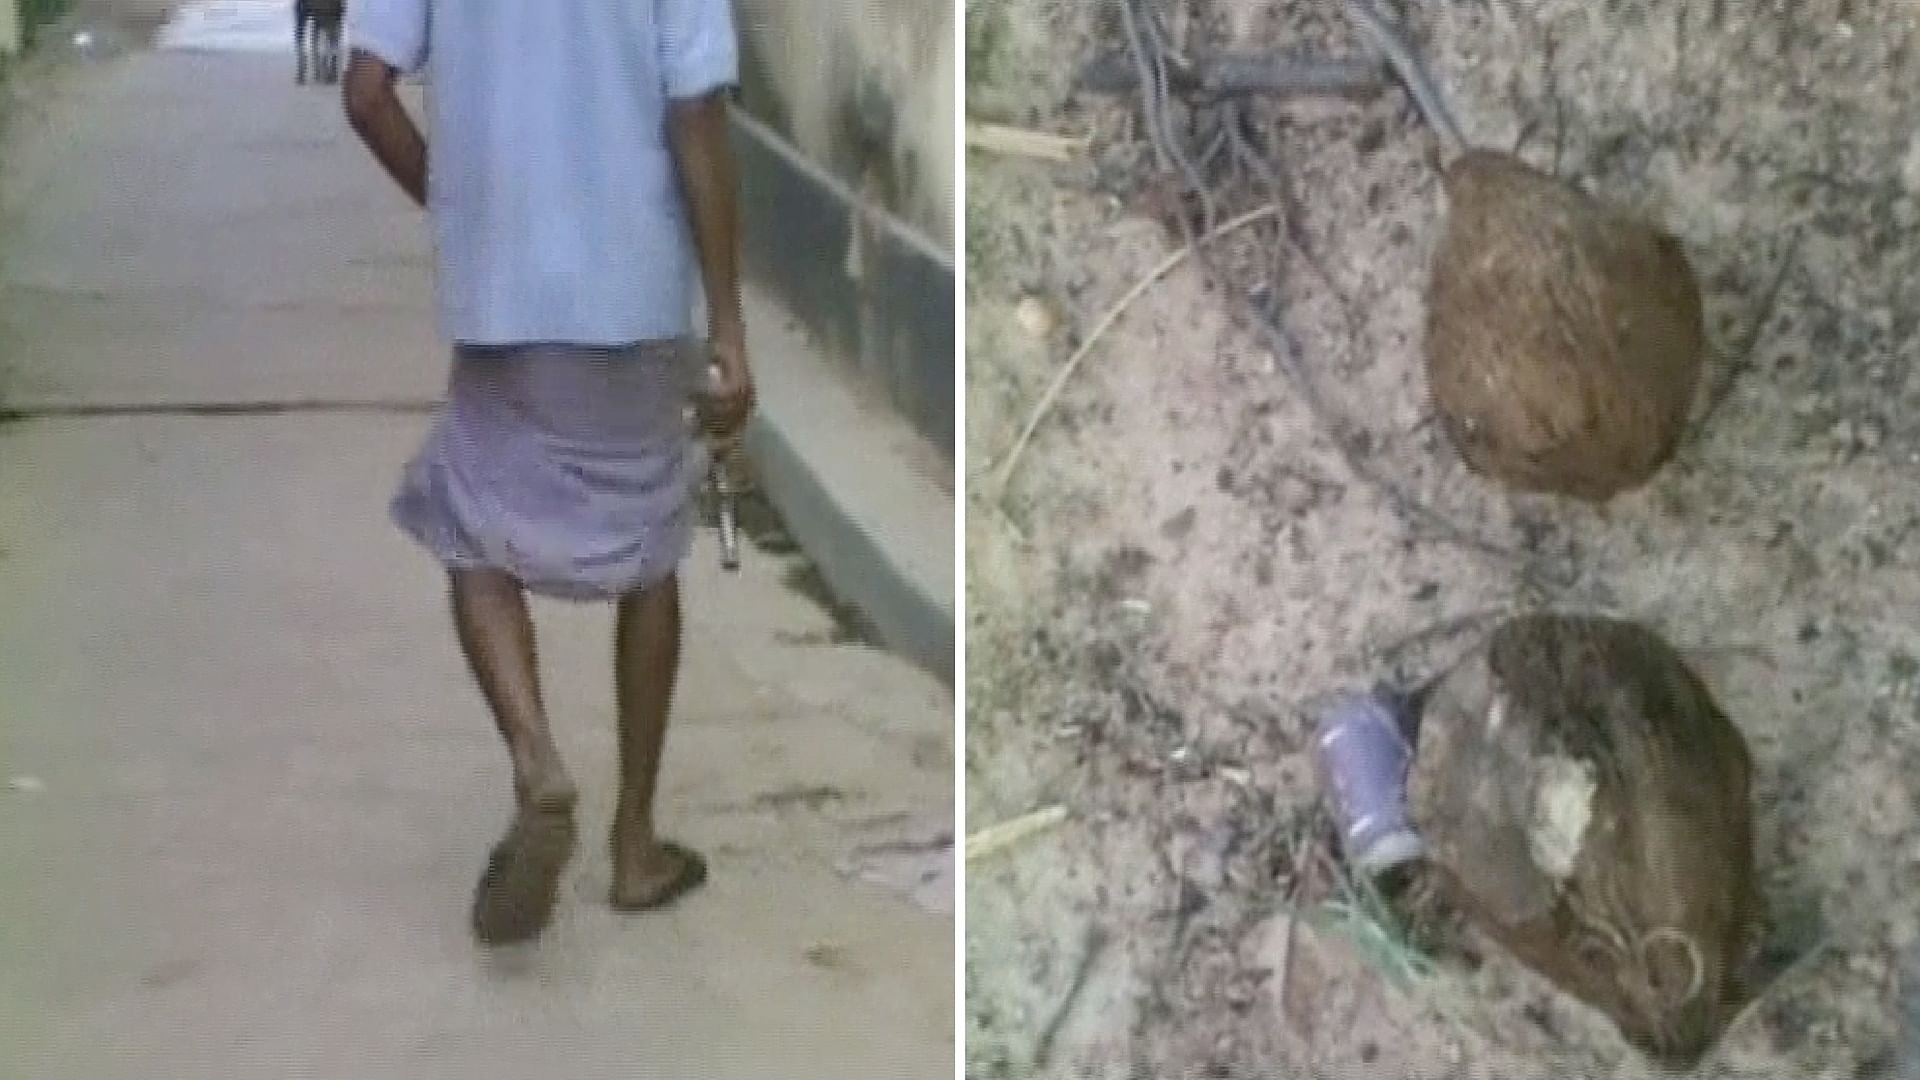 (Left-Right) Unidentified man with a pistol and bombs founds in a polling booth in West Bengal. (Photo: ANI)